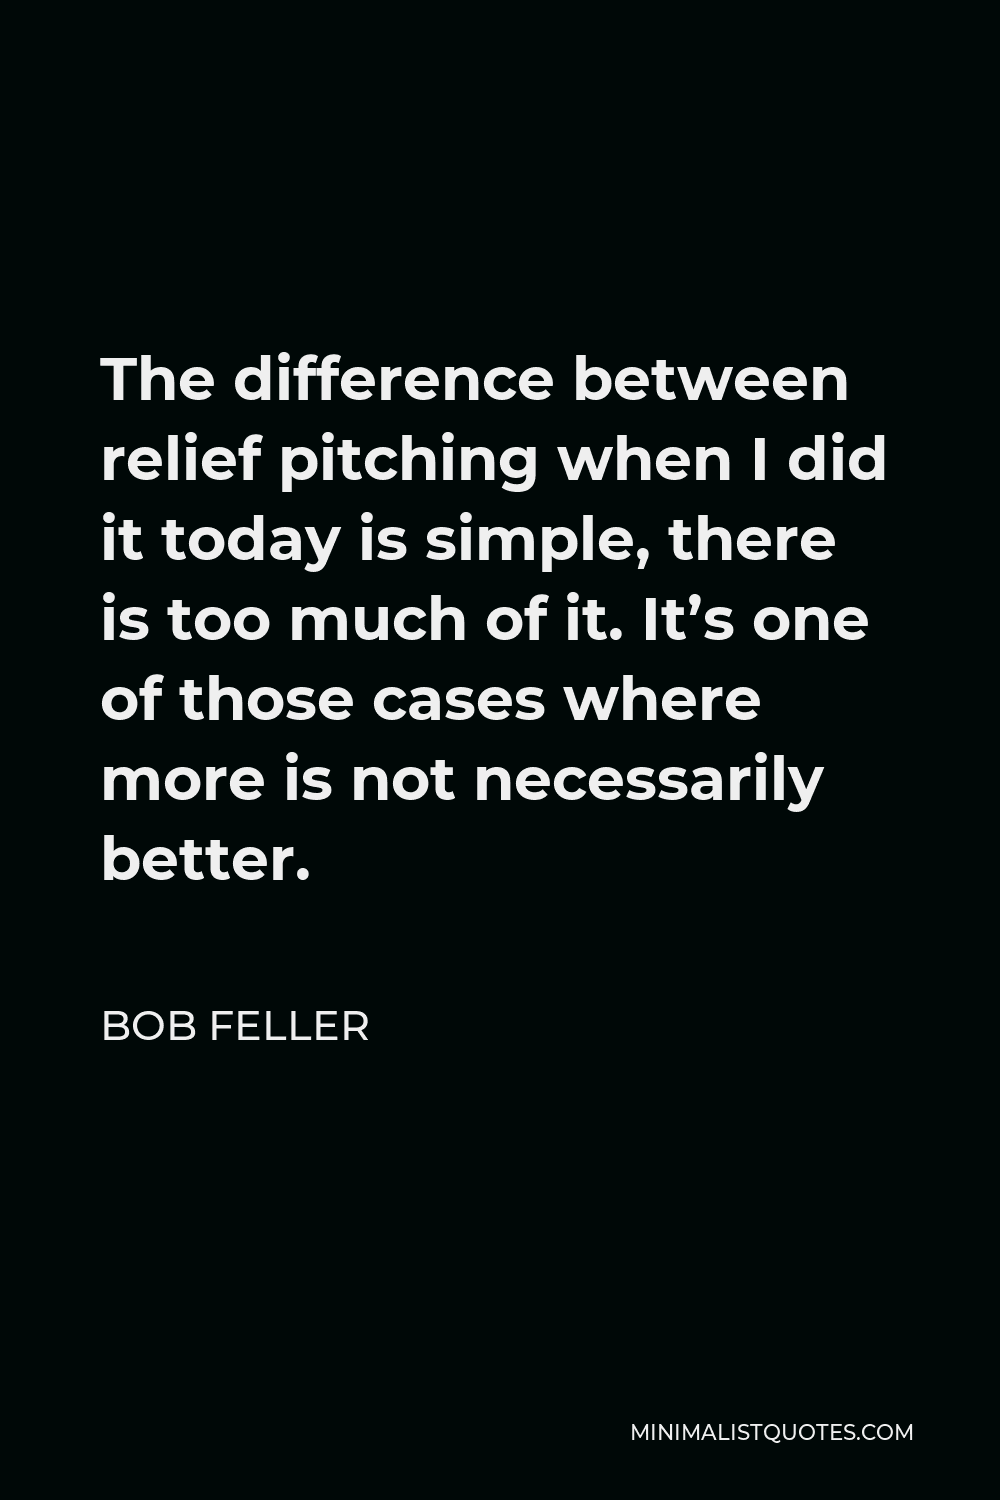 Bob Feller Quote - The difference between relief pitching when I did it today is simple, there is too much of it. It’s one of those cases where more is not necessarily better.